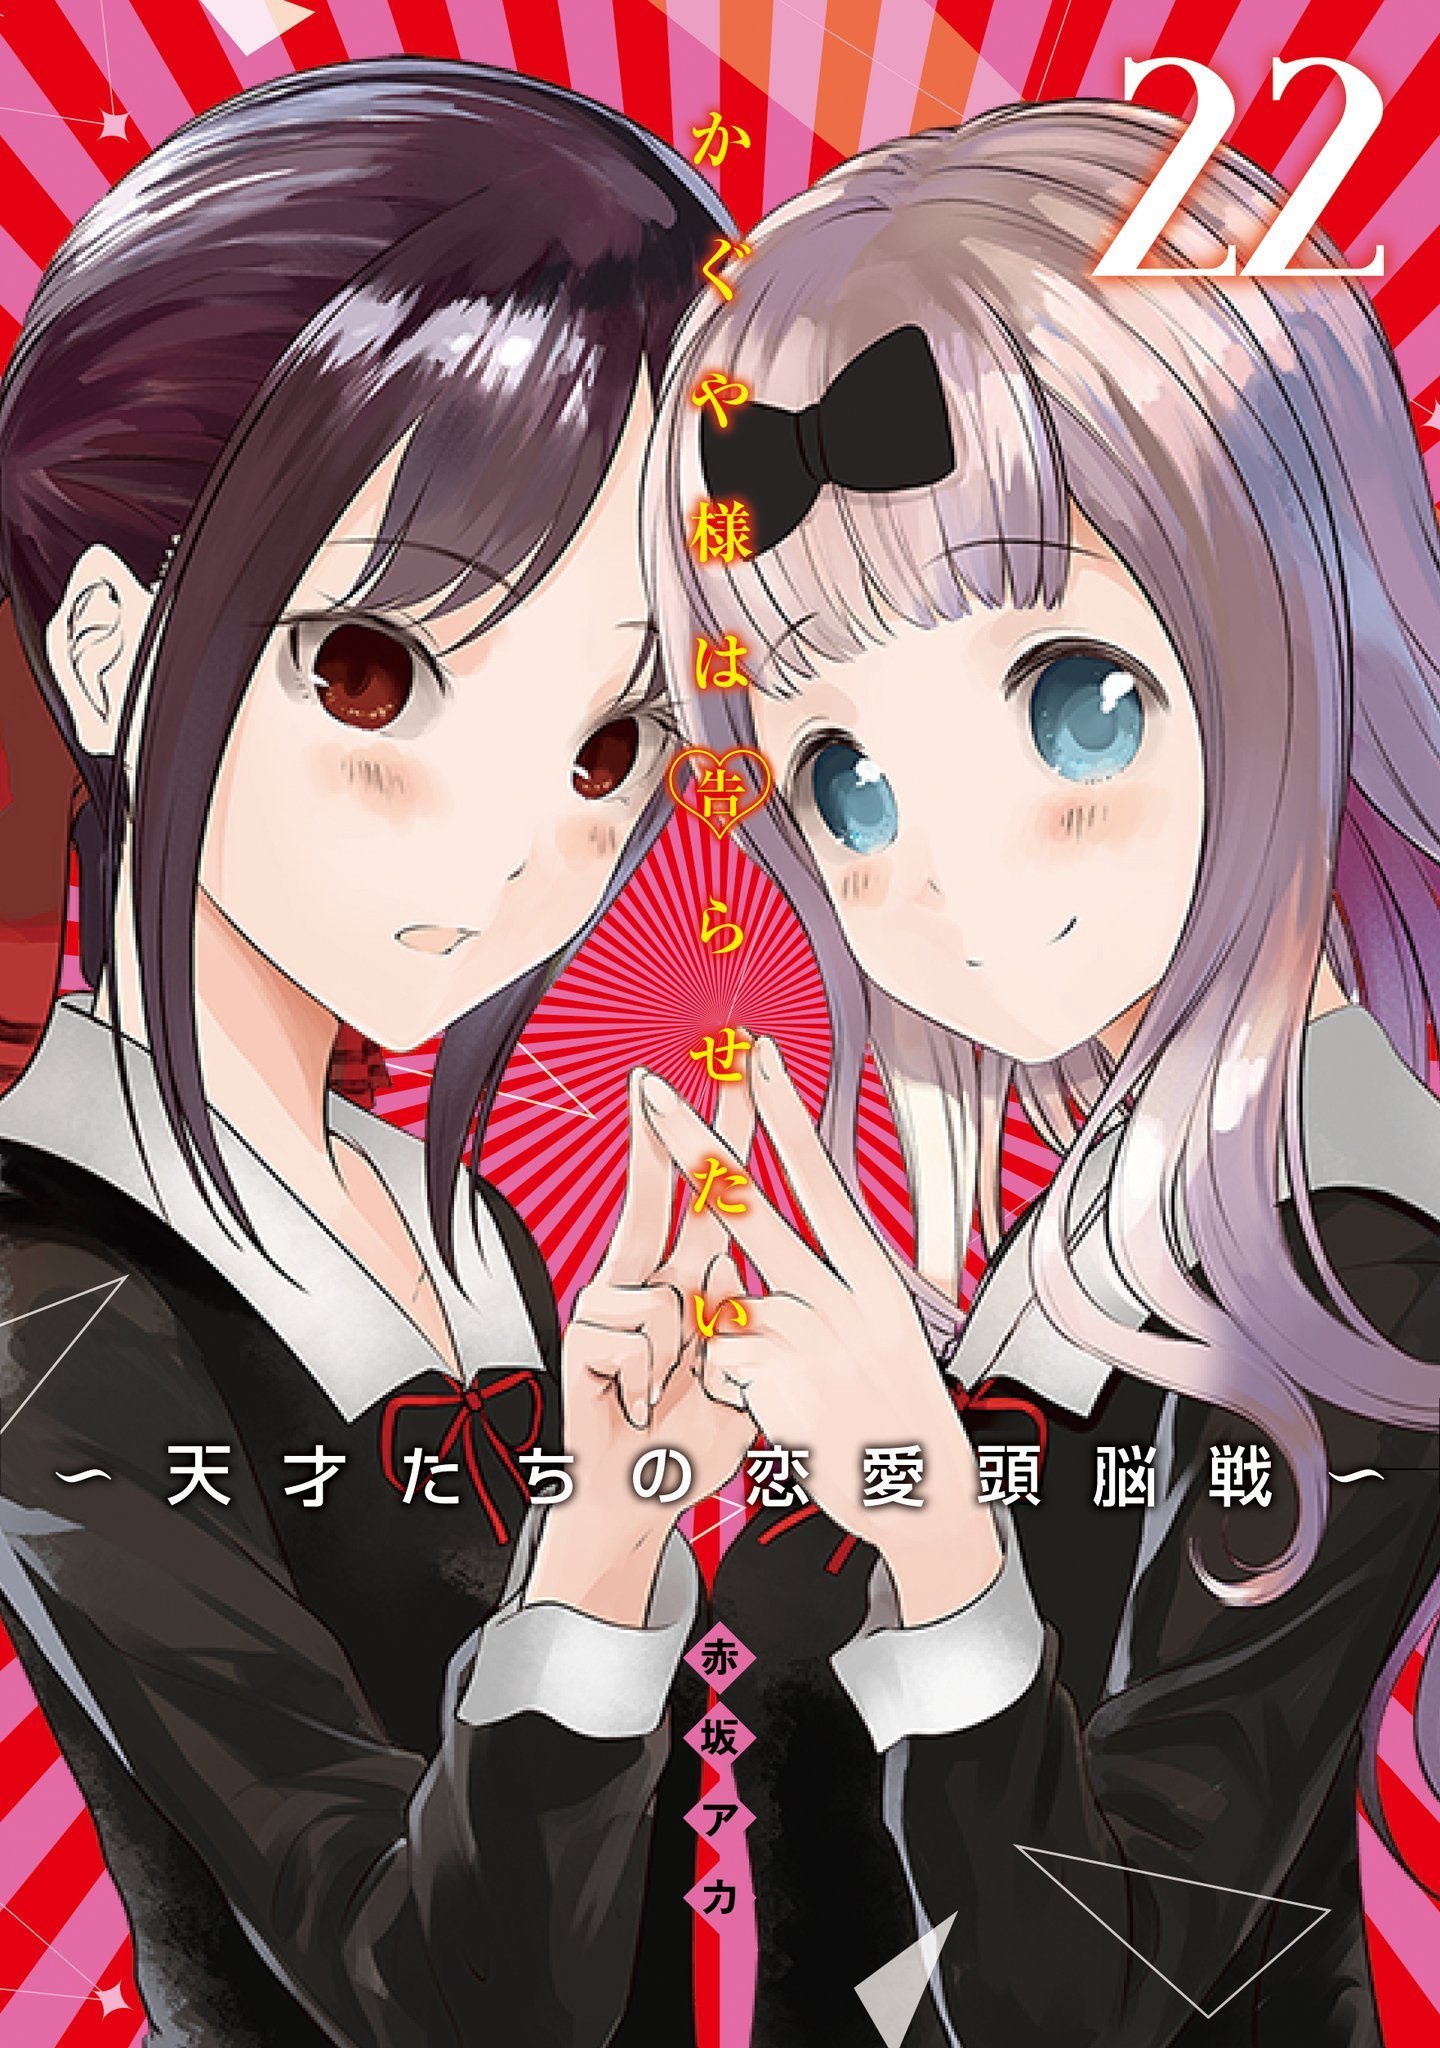 ART] Kaguya-sama - Love is War color page by Aka Akasaka in the latest  Weekly Young Jump issue 38/2021 to celebrate the new live-action movie  opening : r/manga